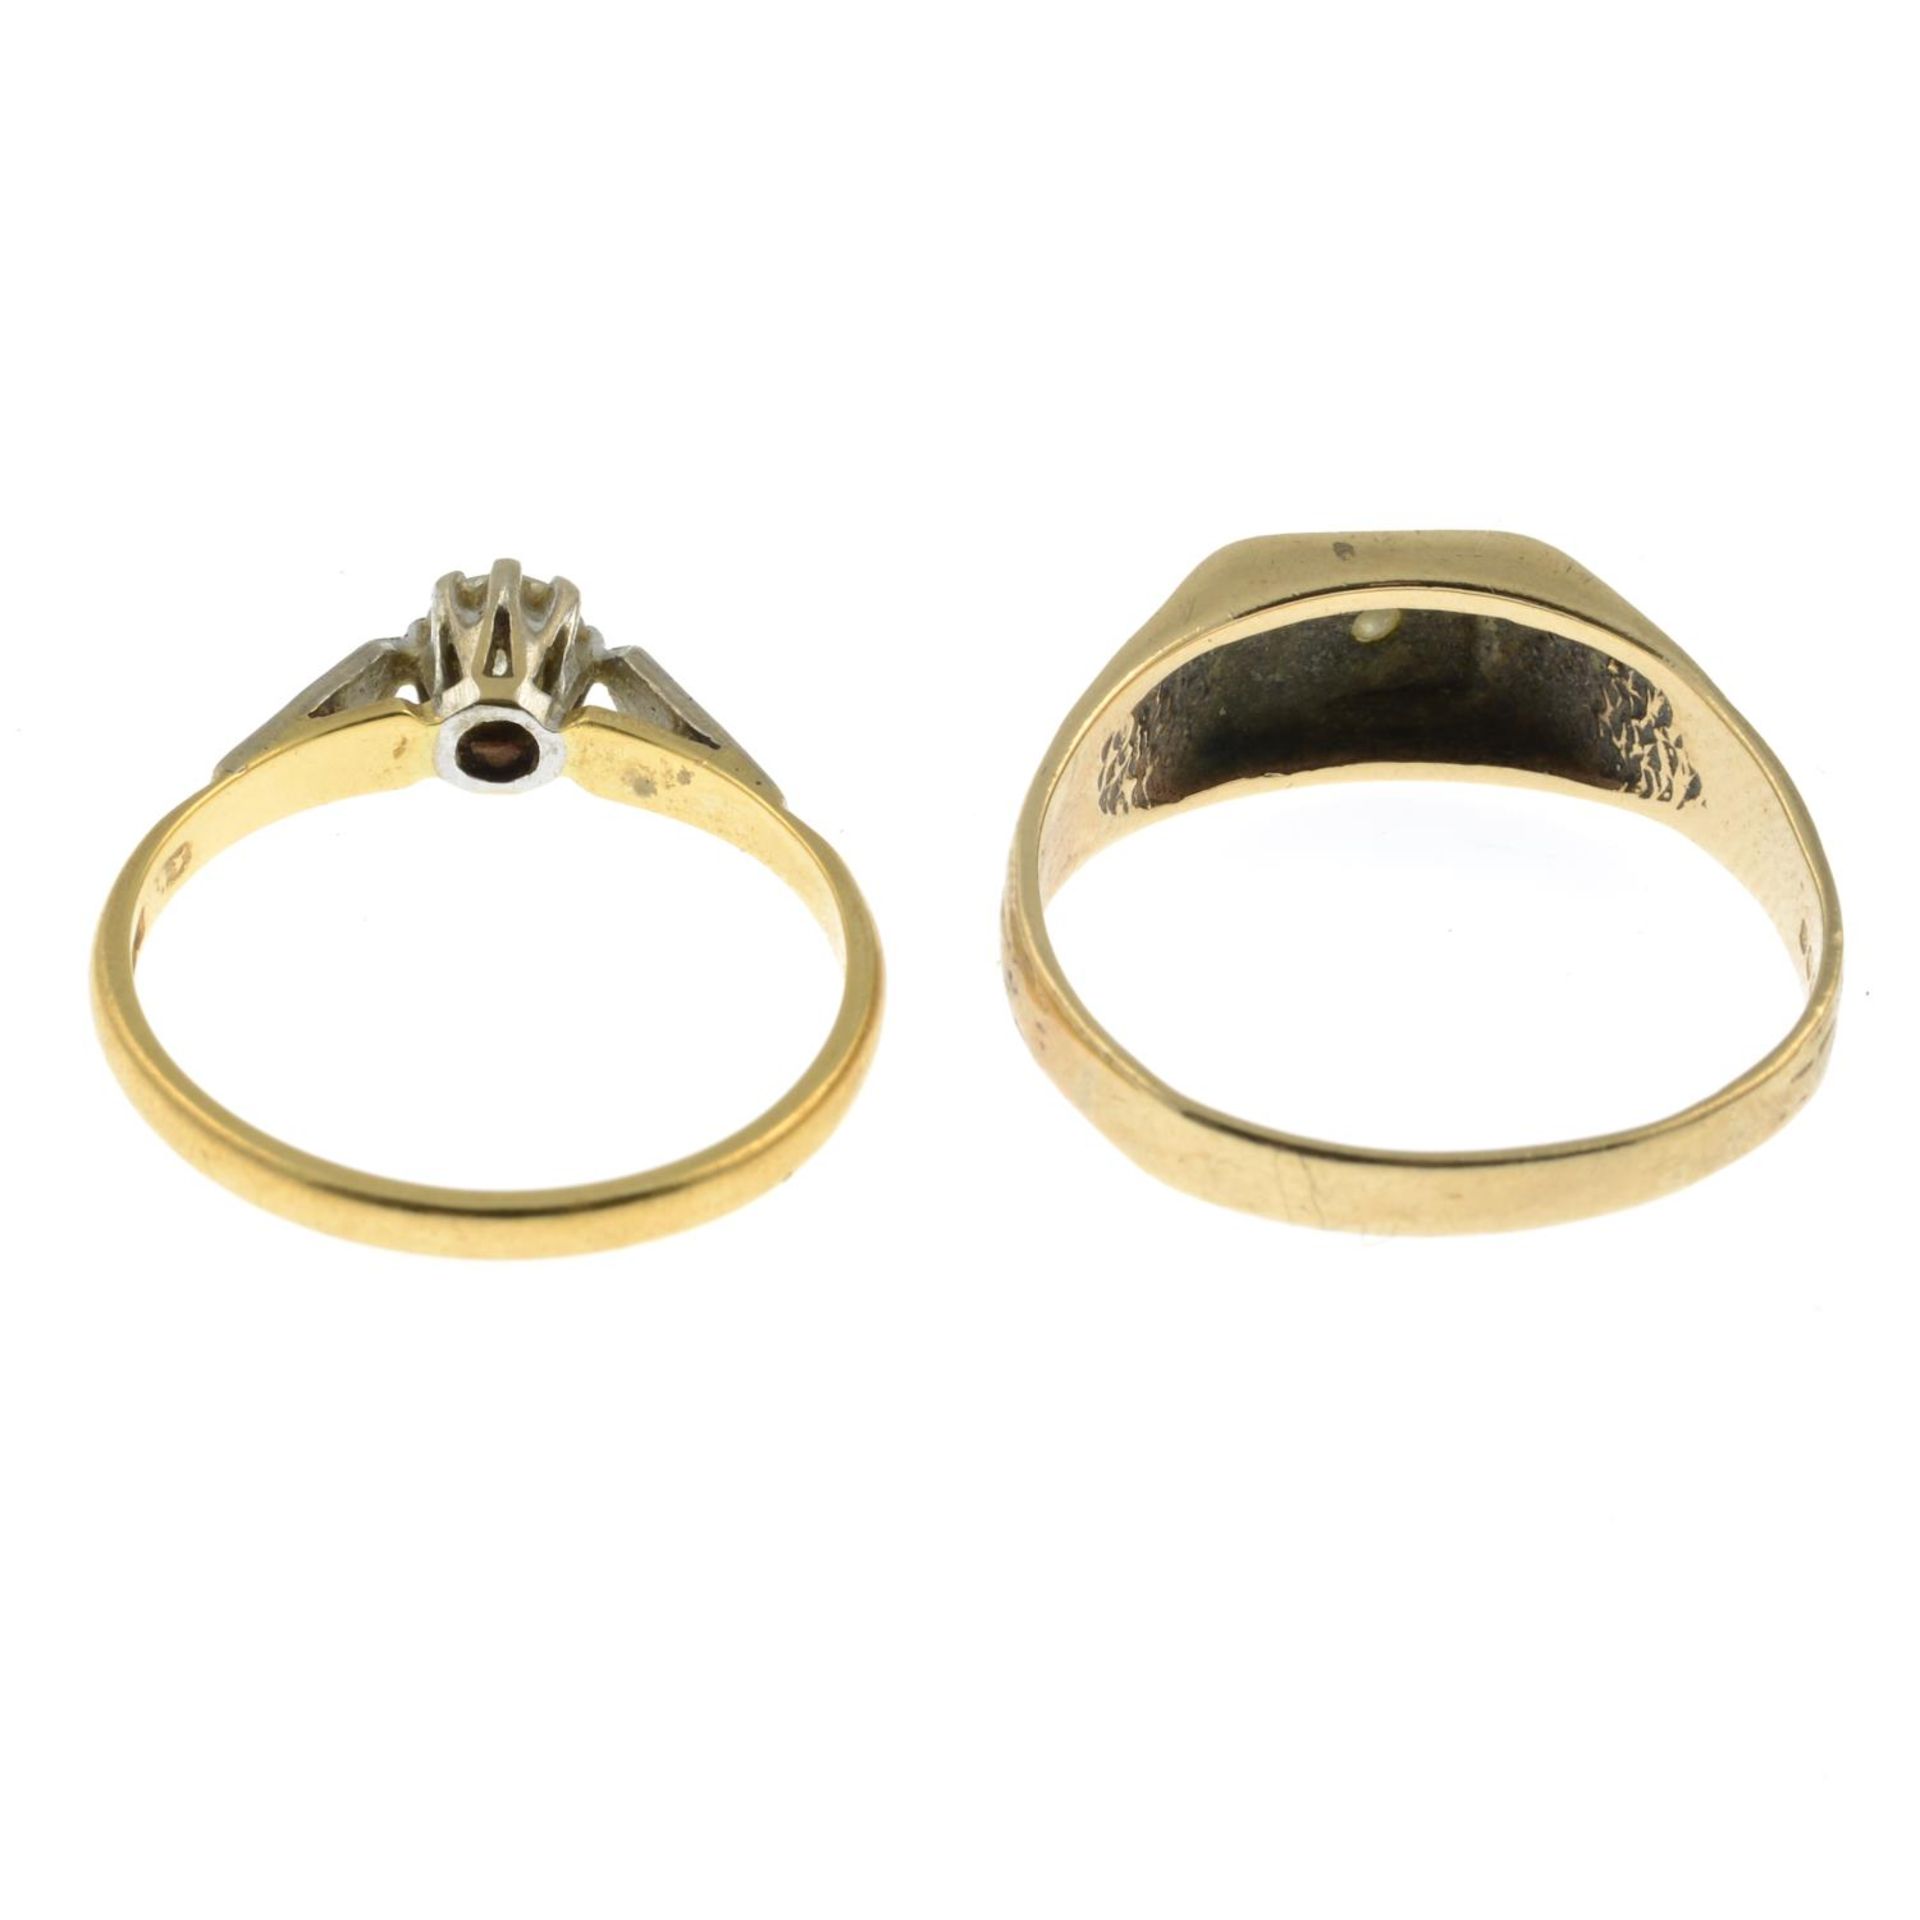 An 18ct gold diamond ring and a 9ct gold diamond ring. - Image 2 of 2